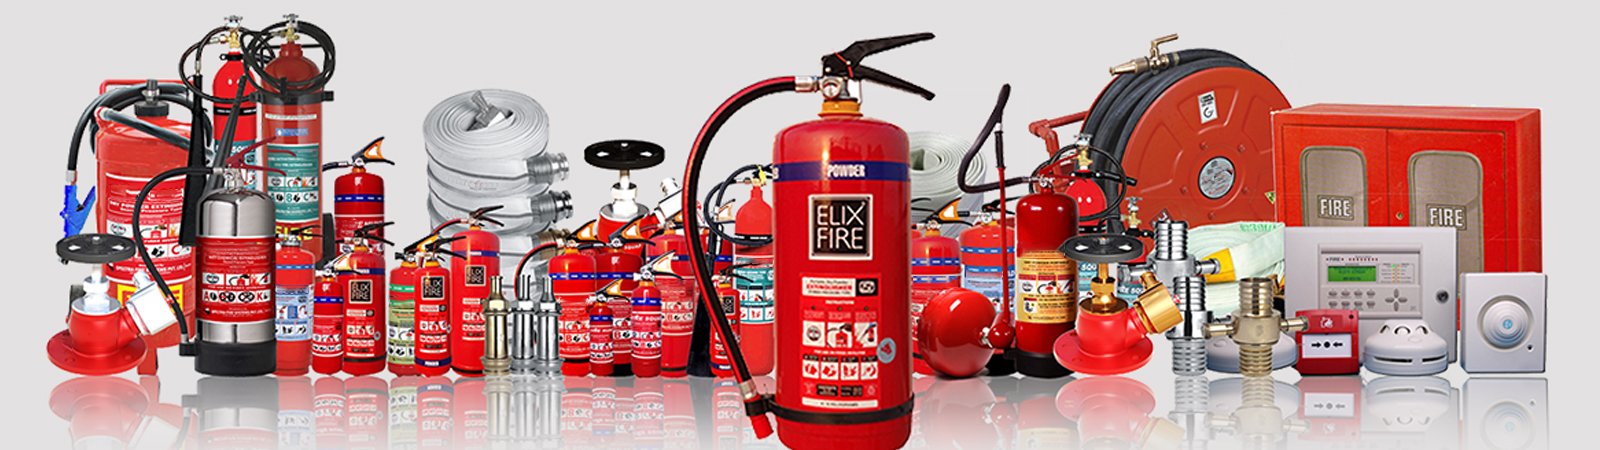 Top 10 Fire Safety Equipment For Home